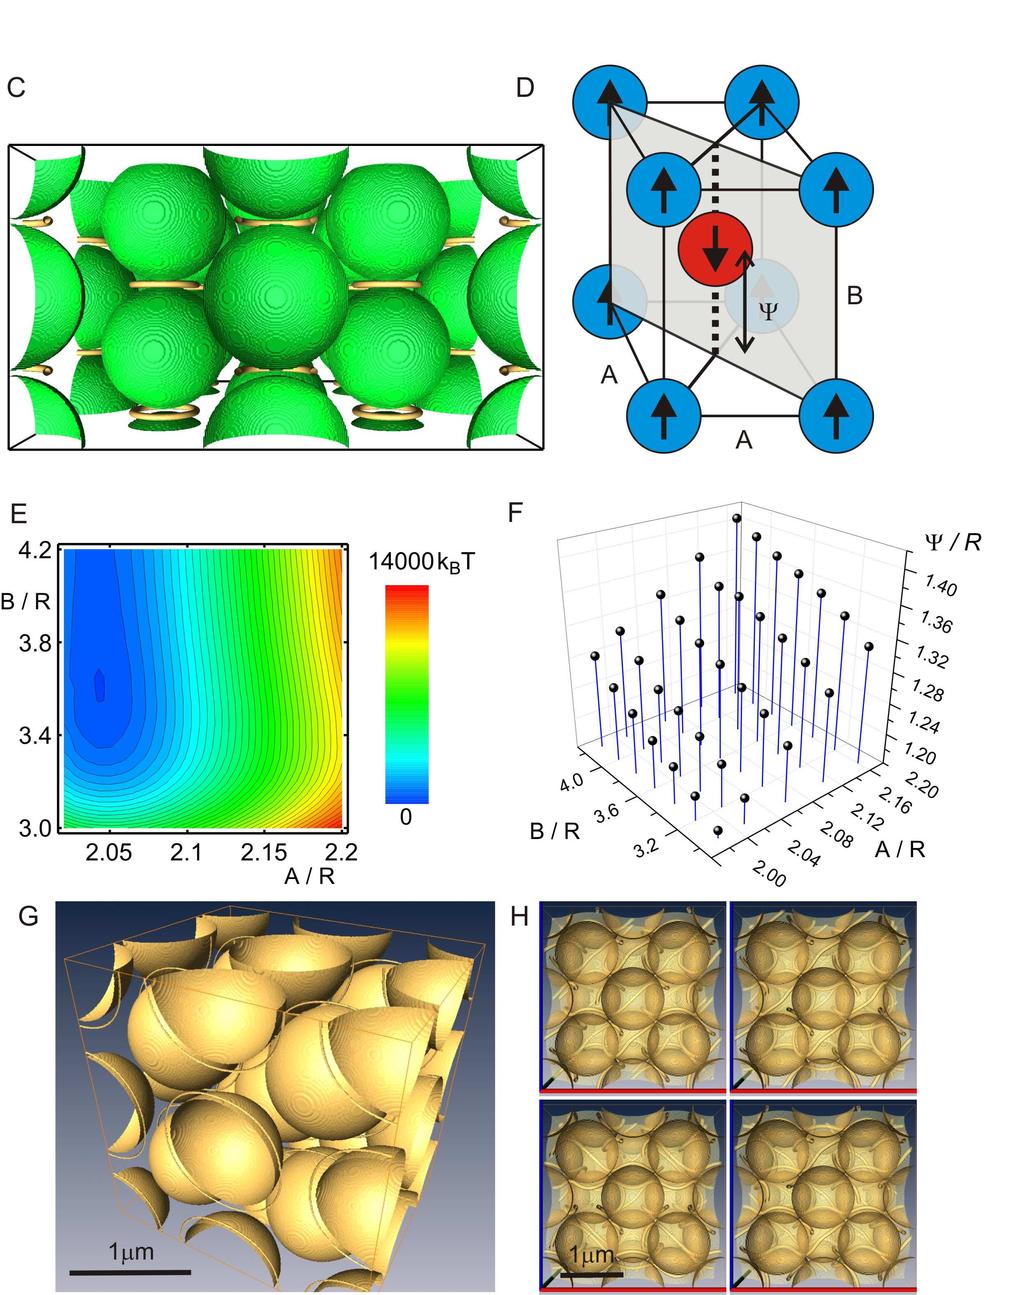 3D entangled colloids - defect motifs spanning in